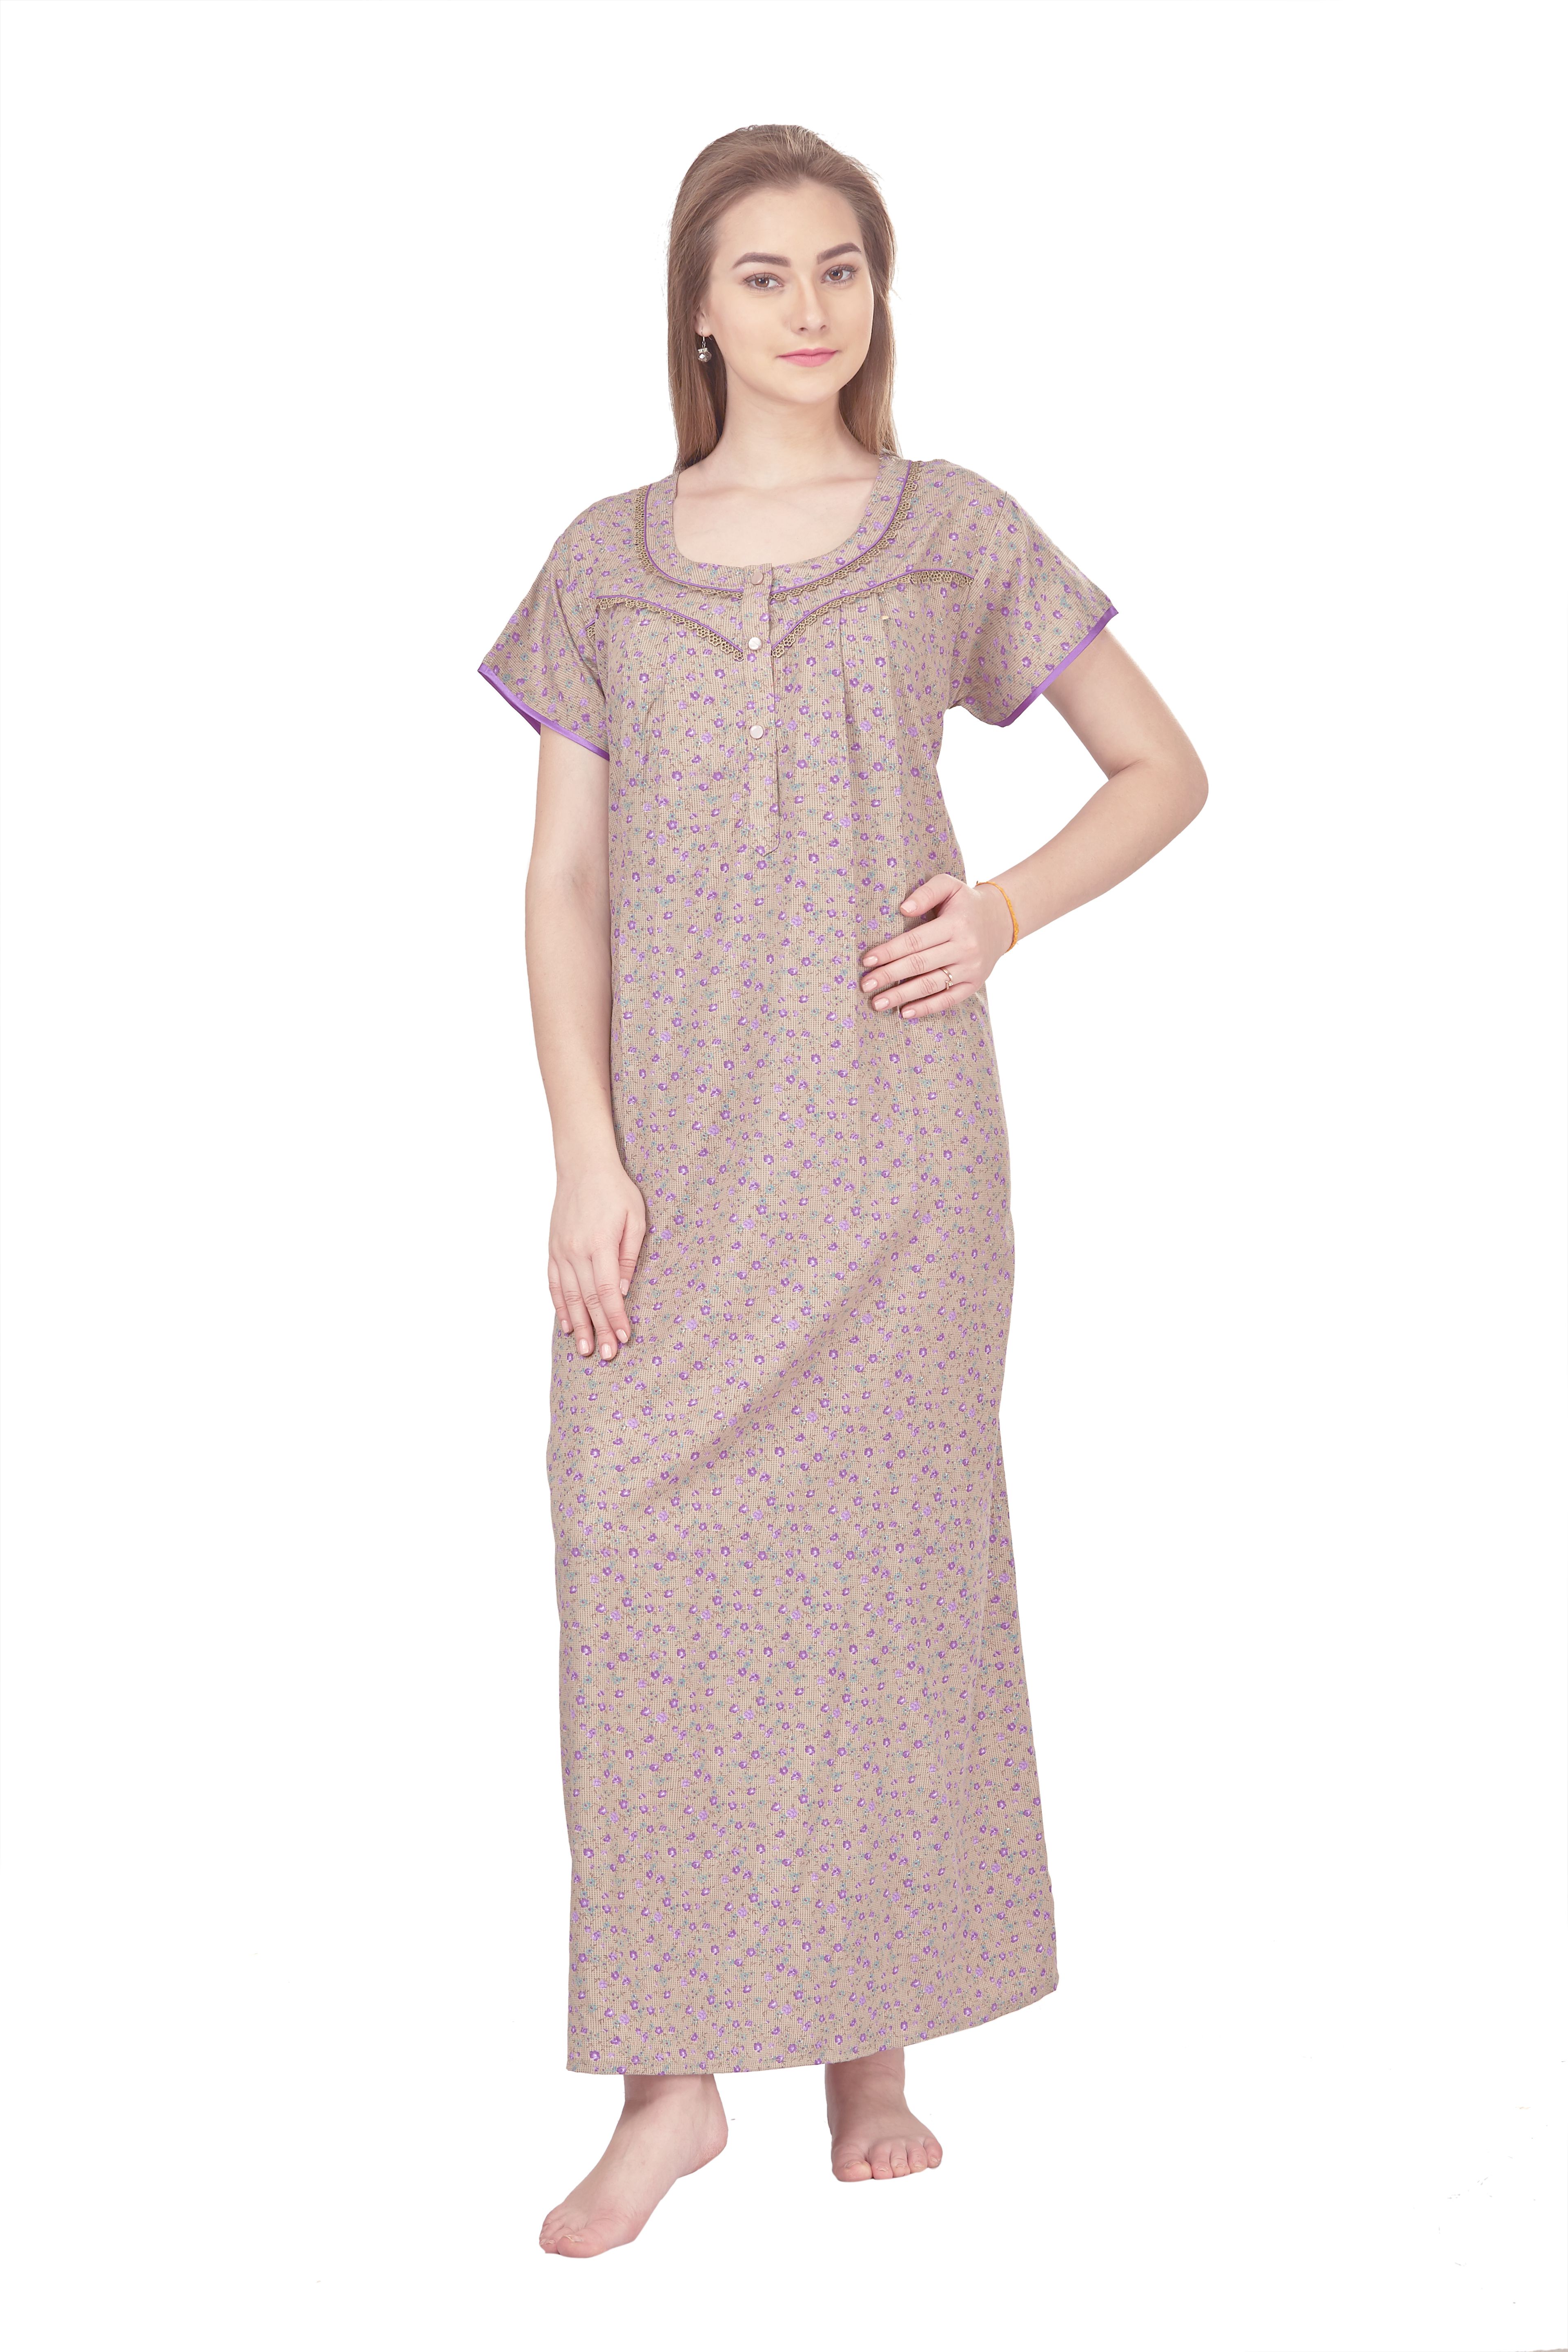 Buy Momtobe Cotton Nighty And Night Gowns Multi Color Online At Best Prices In India Snapdeal 